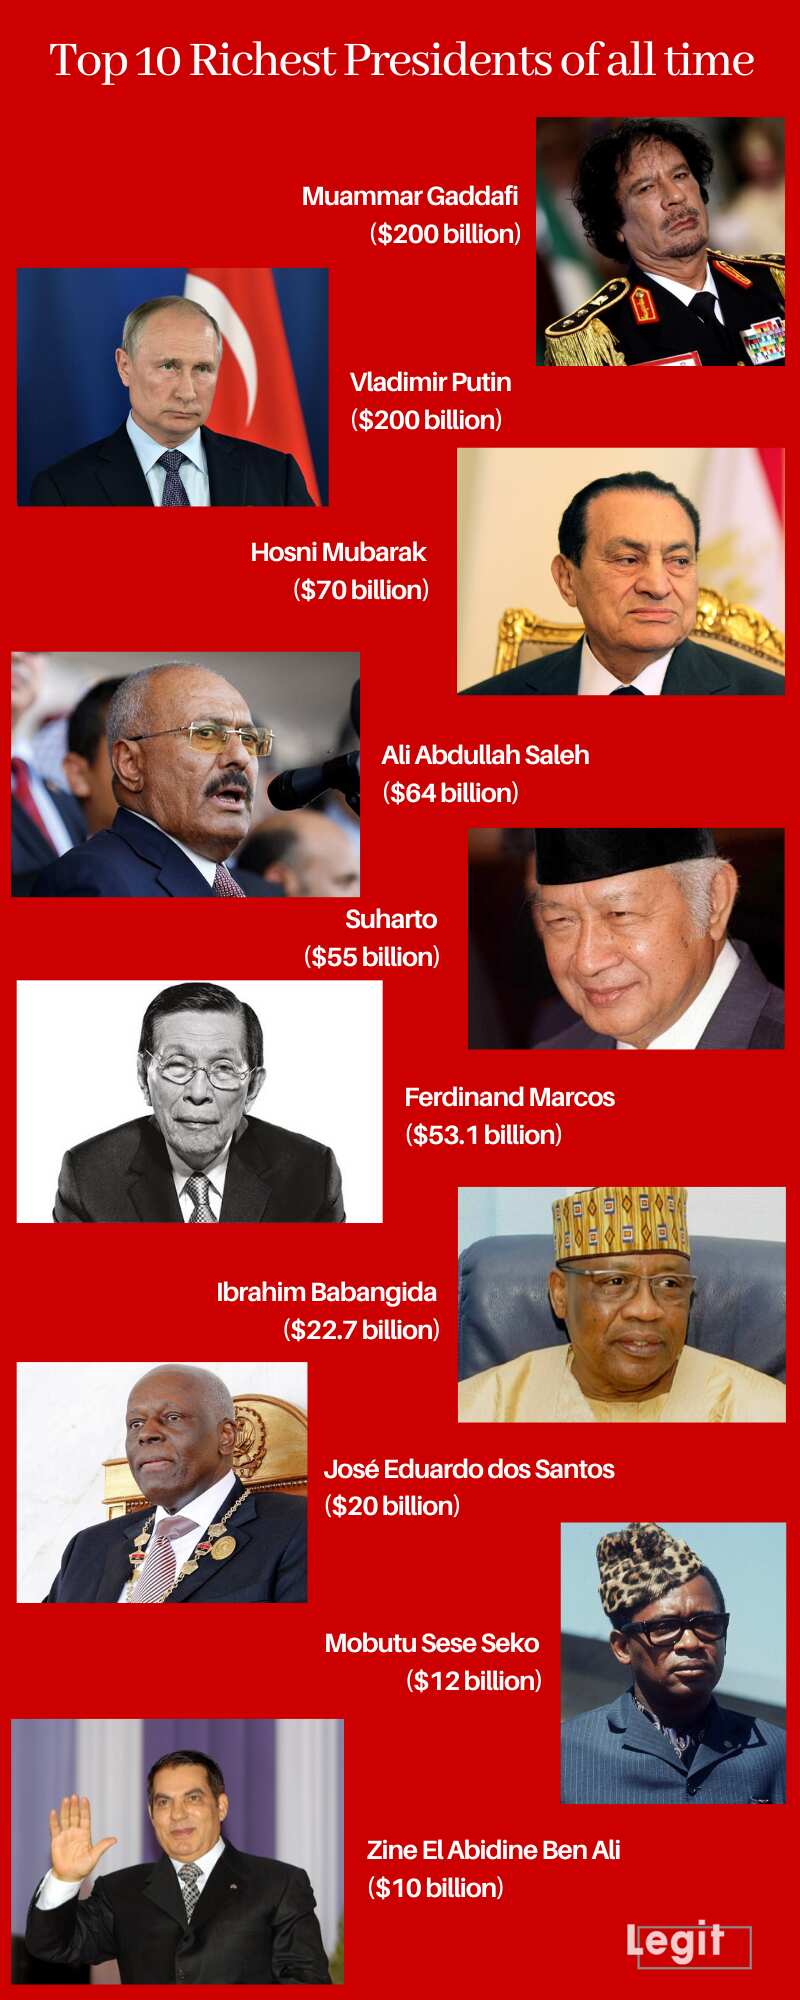 Top richest presidents of all Legit.ng